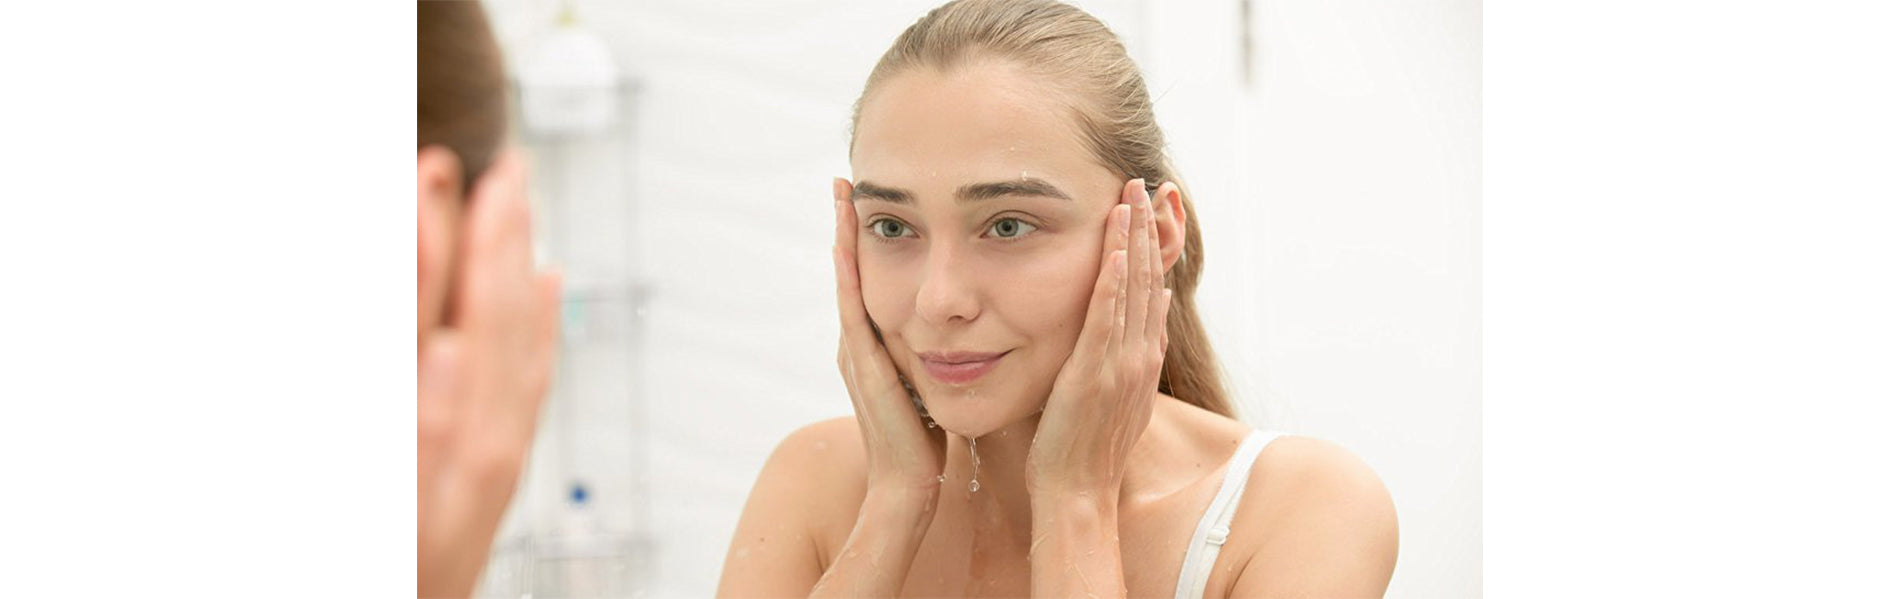 As easy as 1, 2, 3- The ultimate three-step skin care